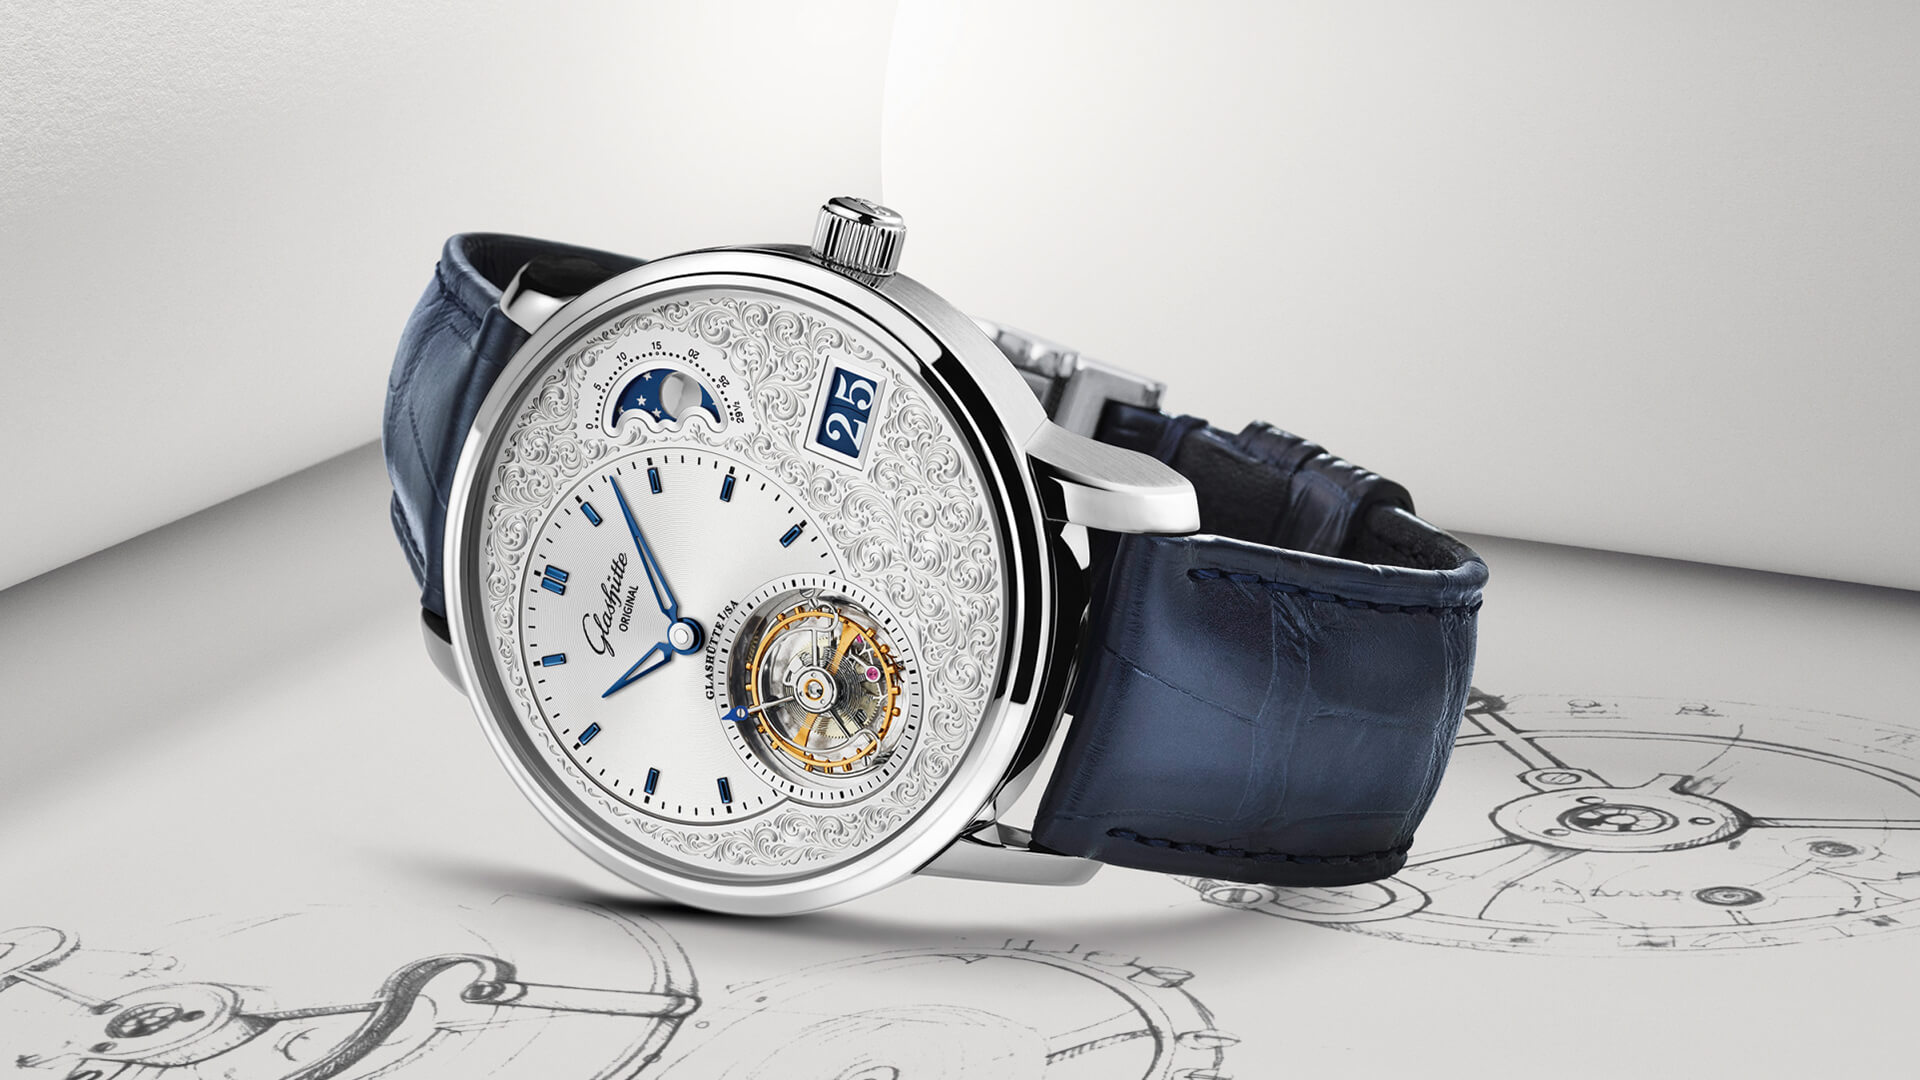 Glashütte Original Adds In-House Hand Engraving To PanoLunarTourbillon In New Limited Edition